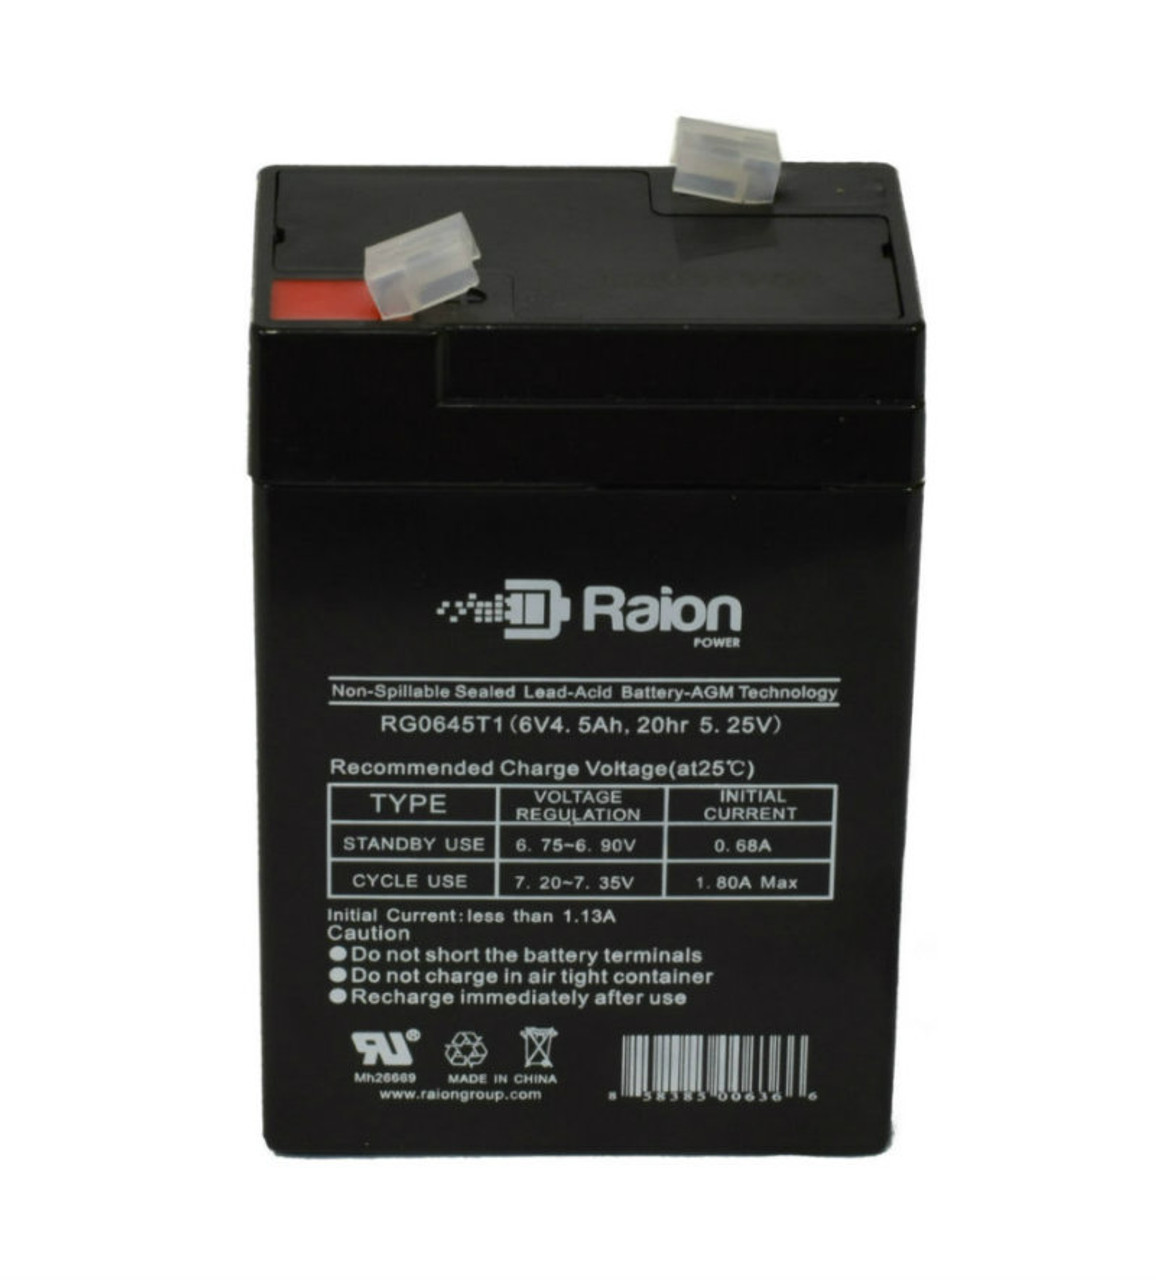 Raion Power RG0645T1 Replacement Battery Cartridge for ELS ELS FRX